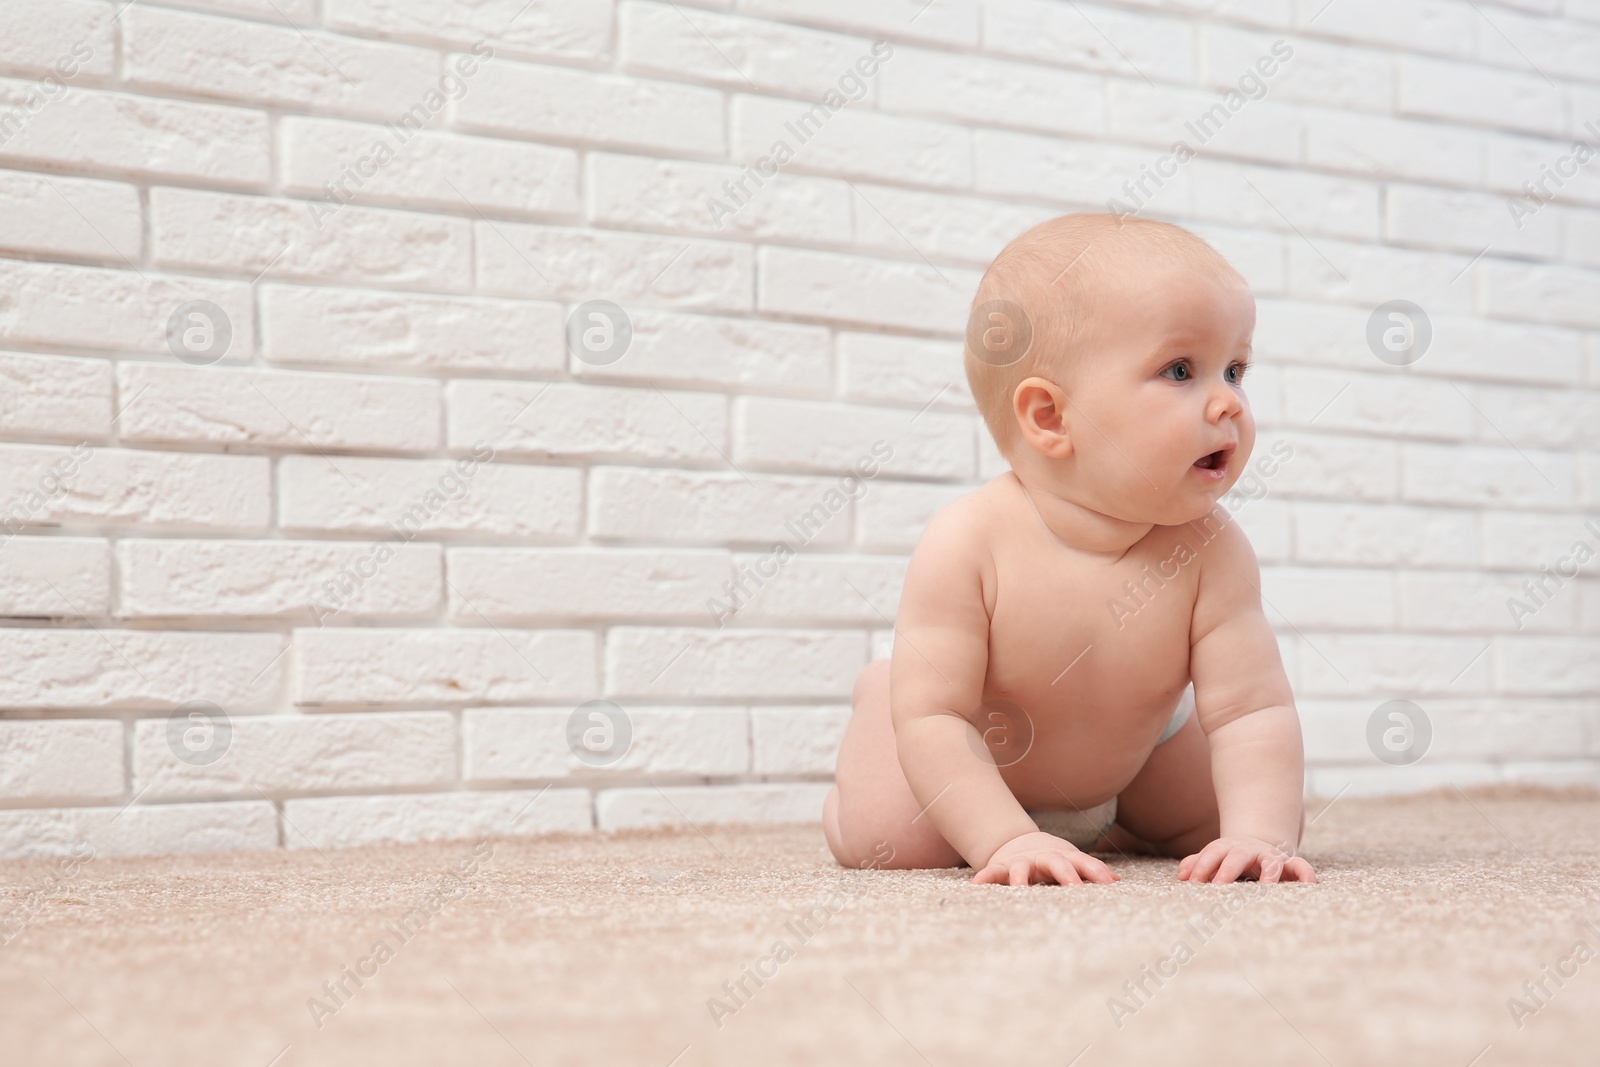 Photo of Cute little baby crawling on carpet near brick wall, space for text